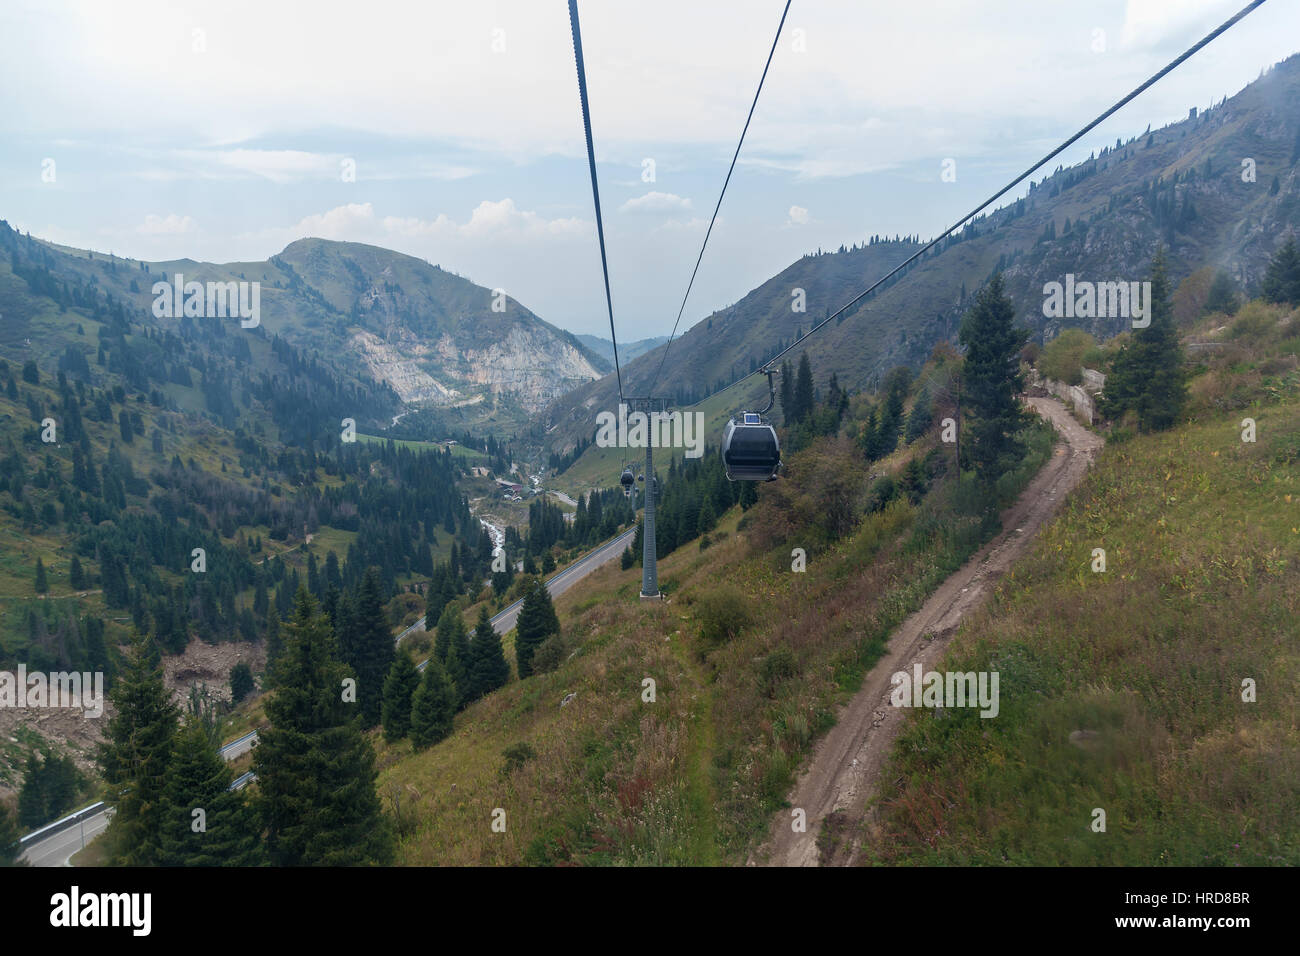 Cableway among the mountains. Cableway with cabins moving through the Kazakhstan mountains in summer. Stock Photo